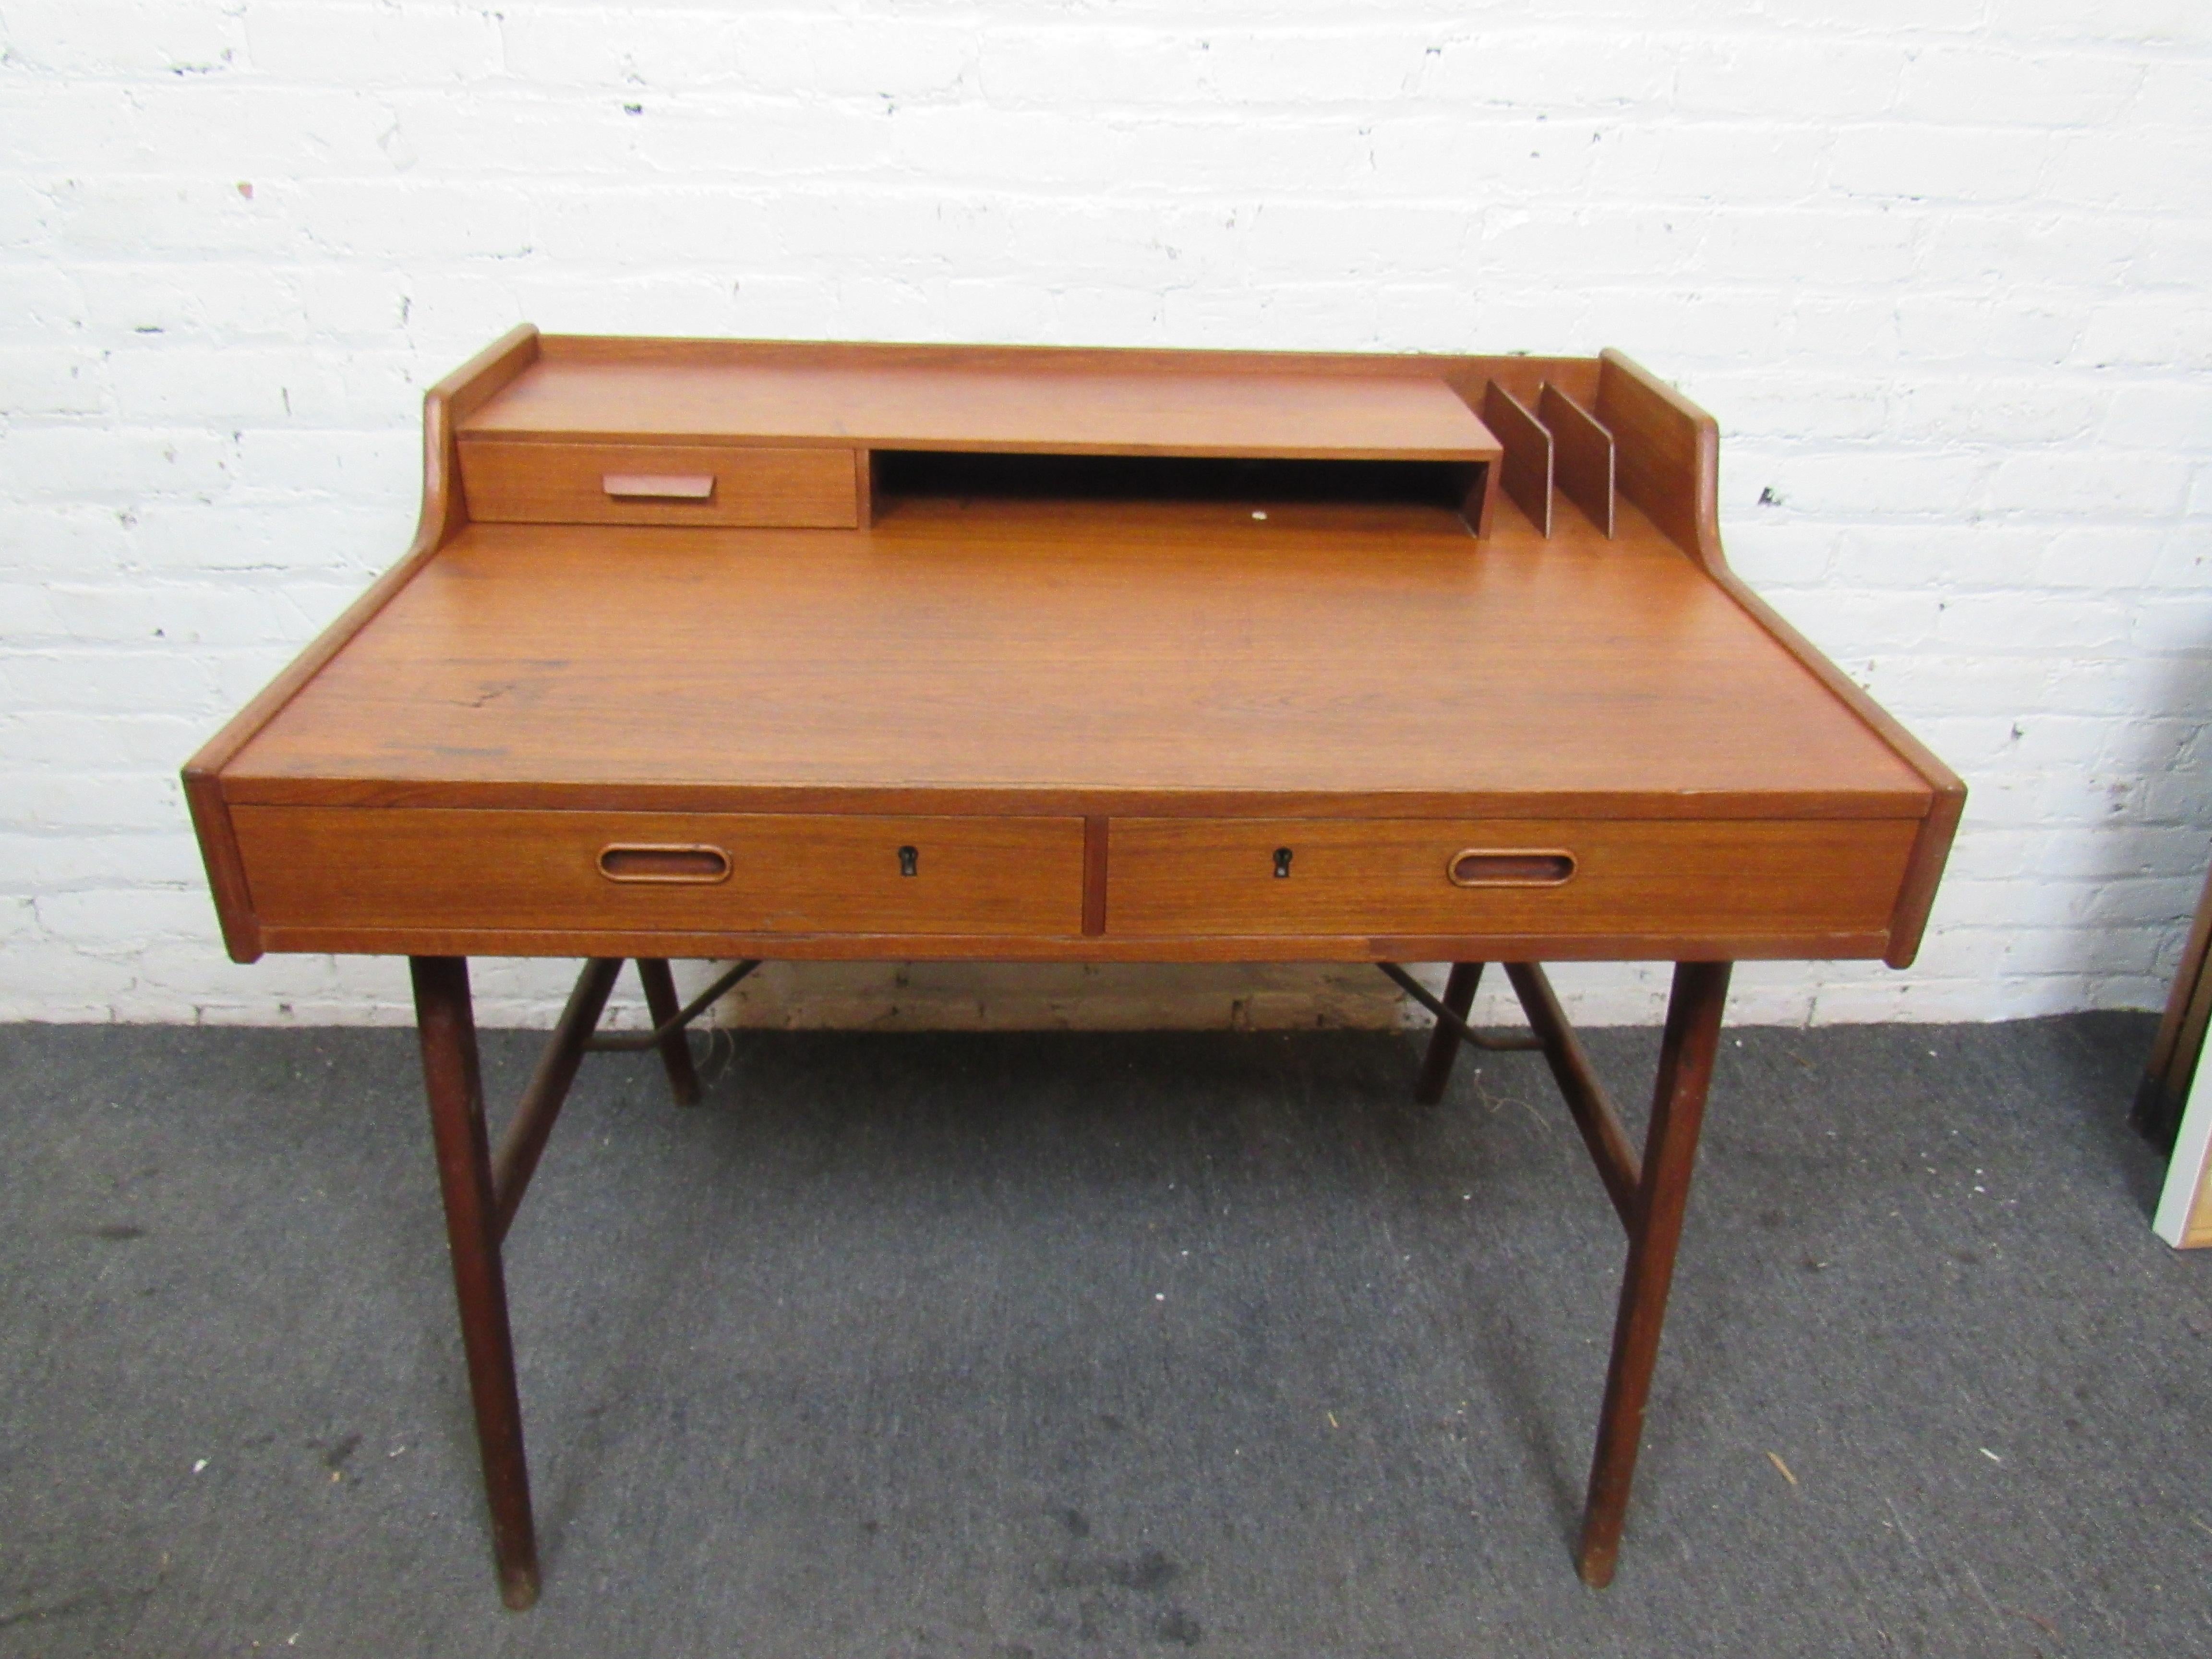 Gorgeous Danish teak desk from the 60s. Classic Mid-Century Modern design with deep desk space. 
(Please confirm item location - NY or NJ - with dealer).
 